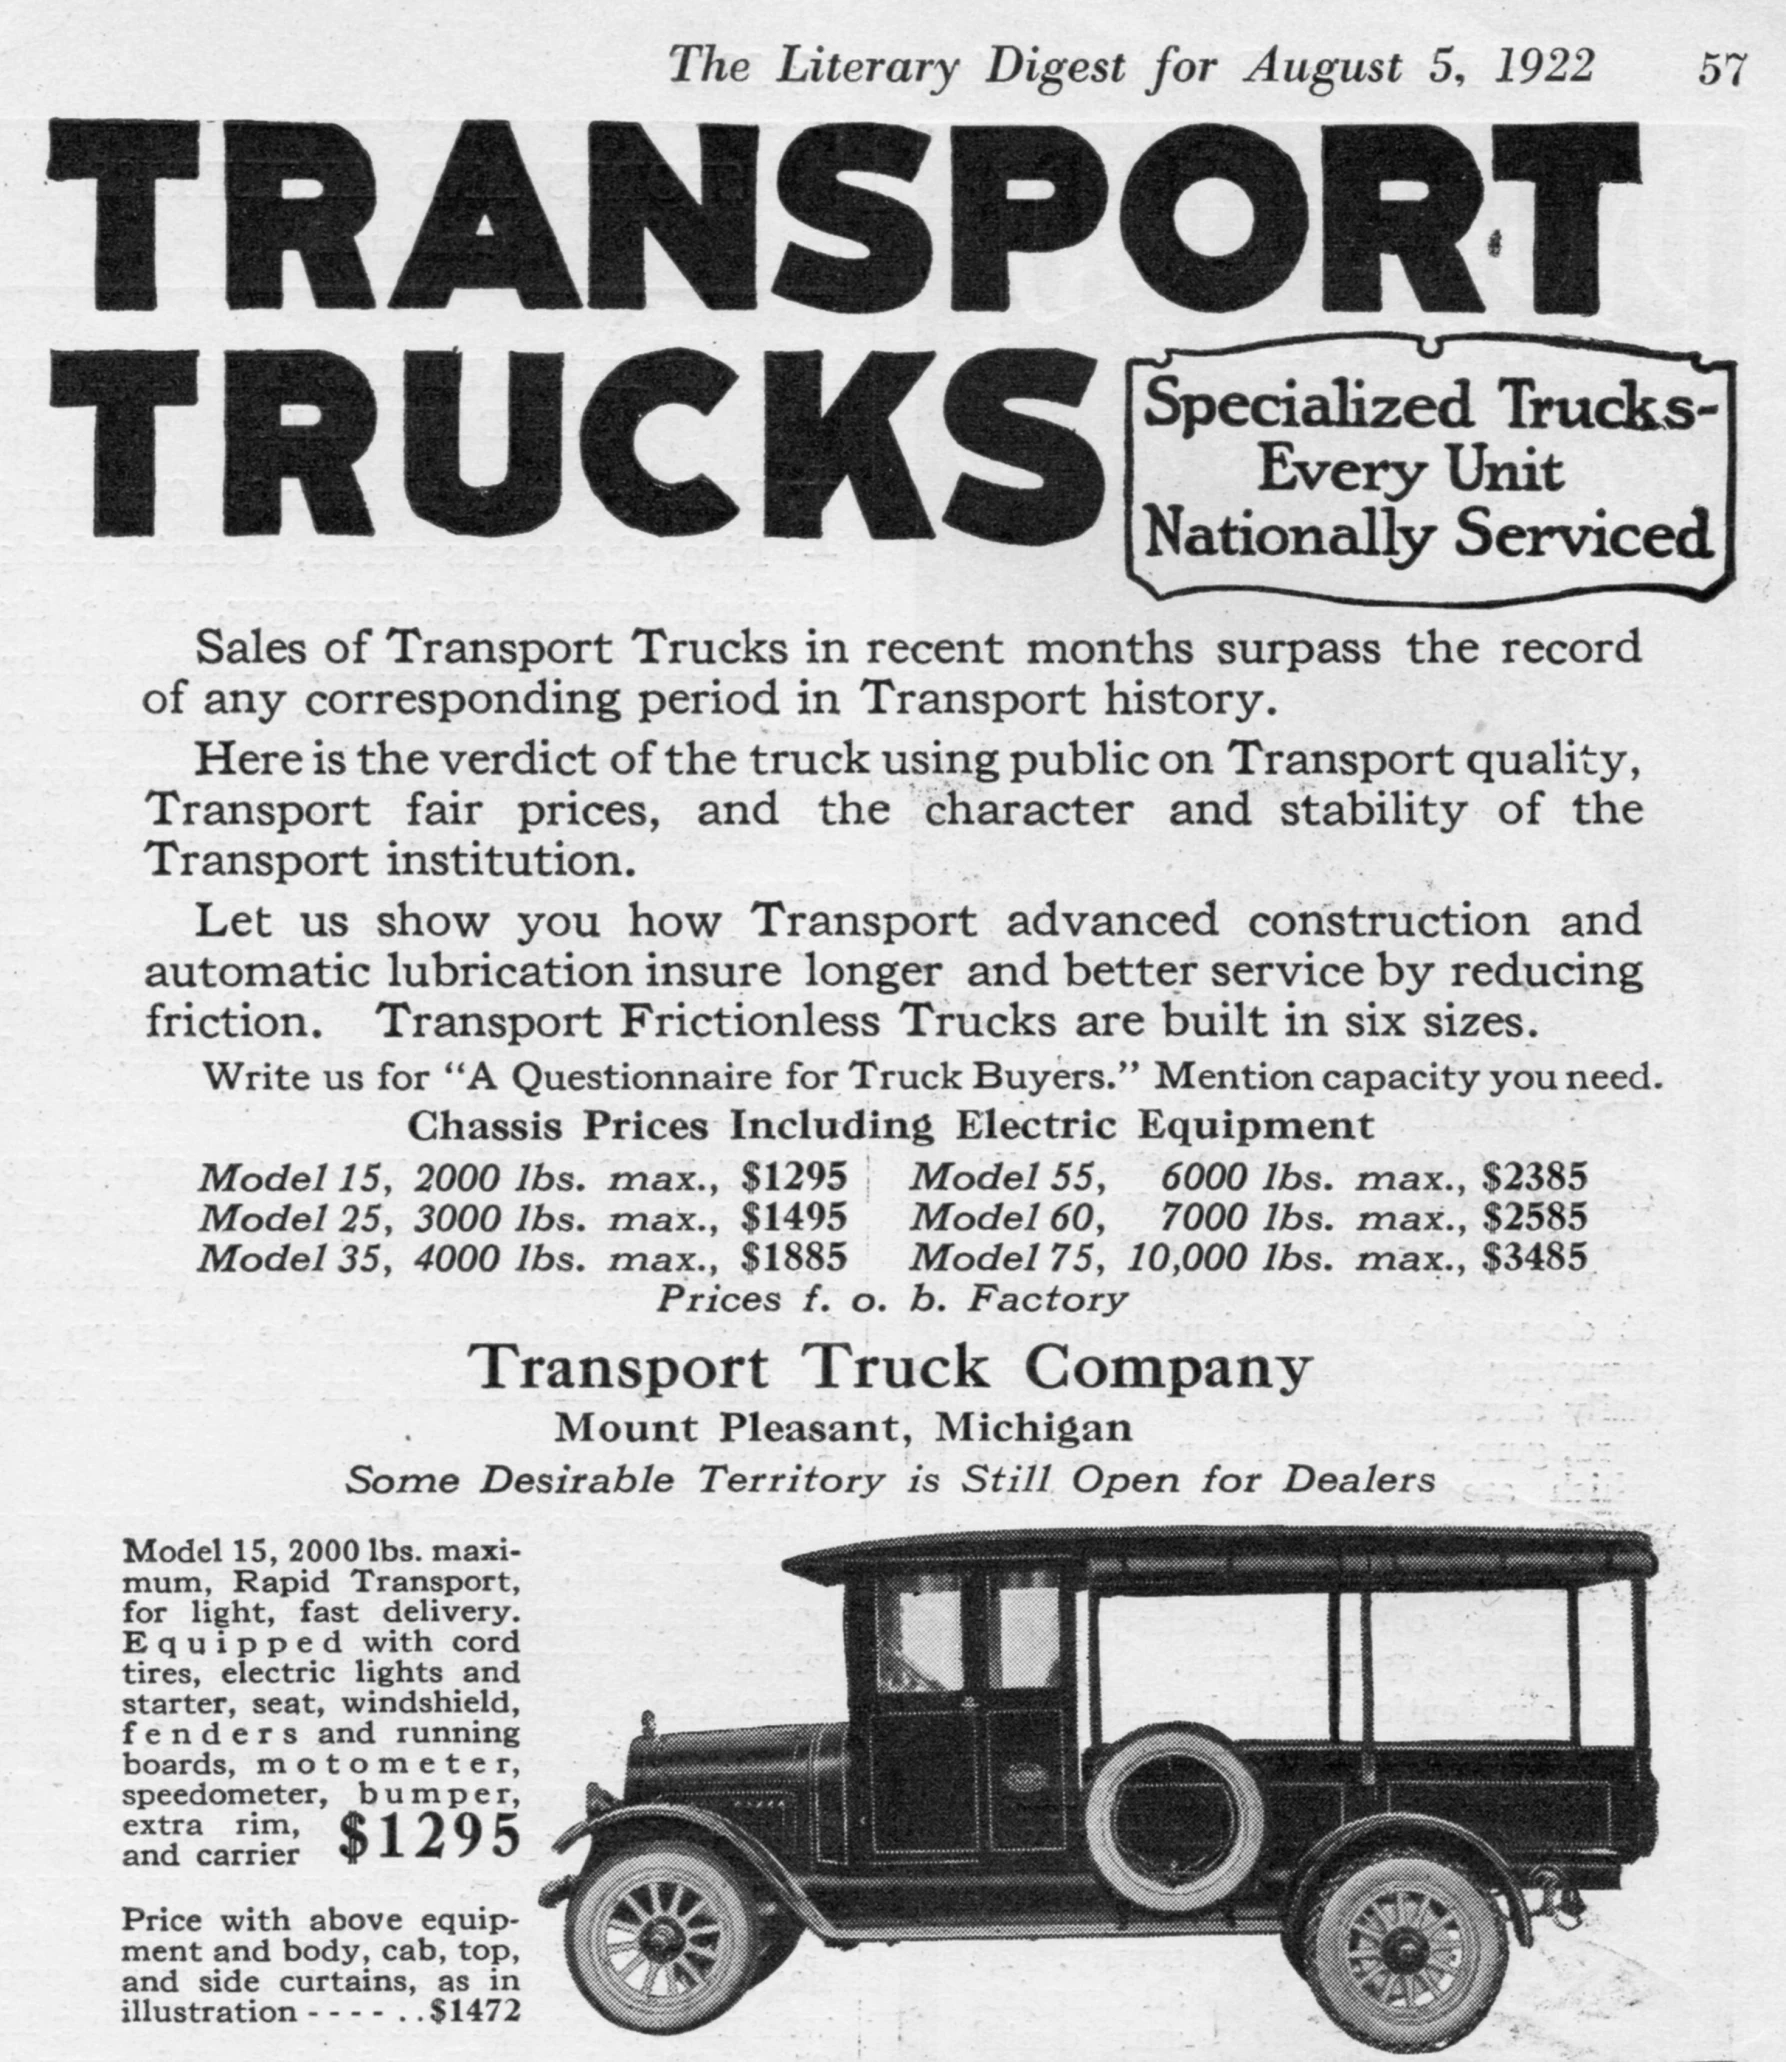 an advertit advertising a truck on sale in an old po